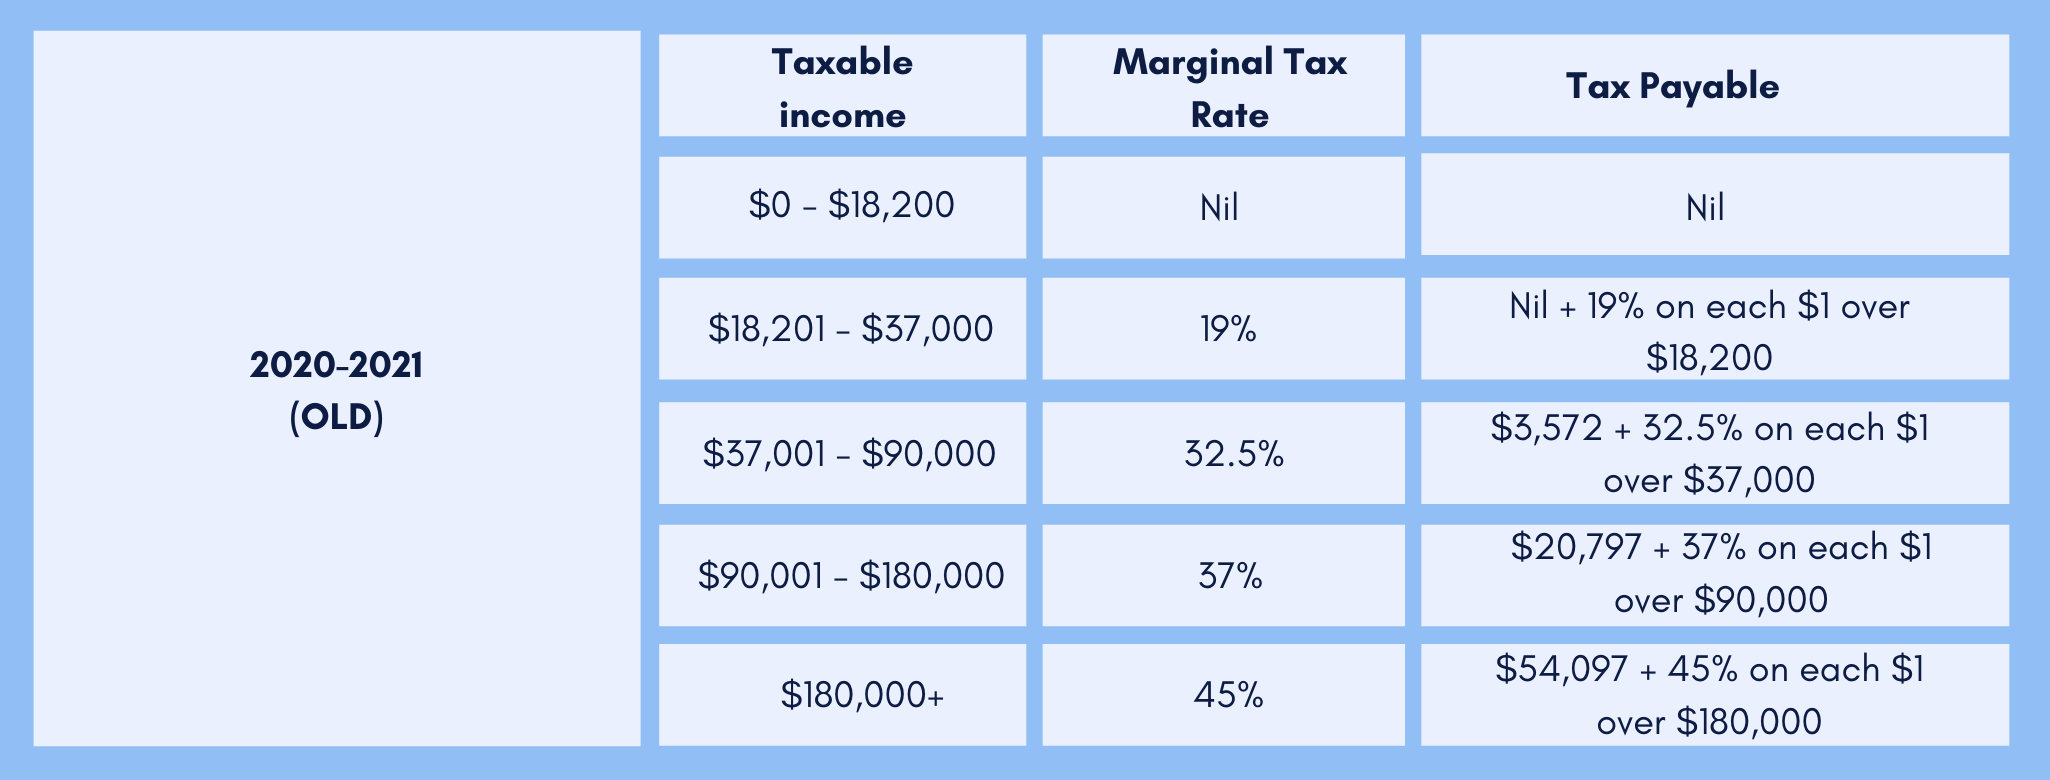 old personal income tax plan